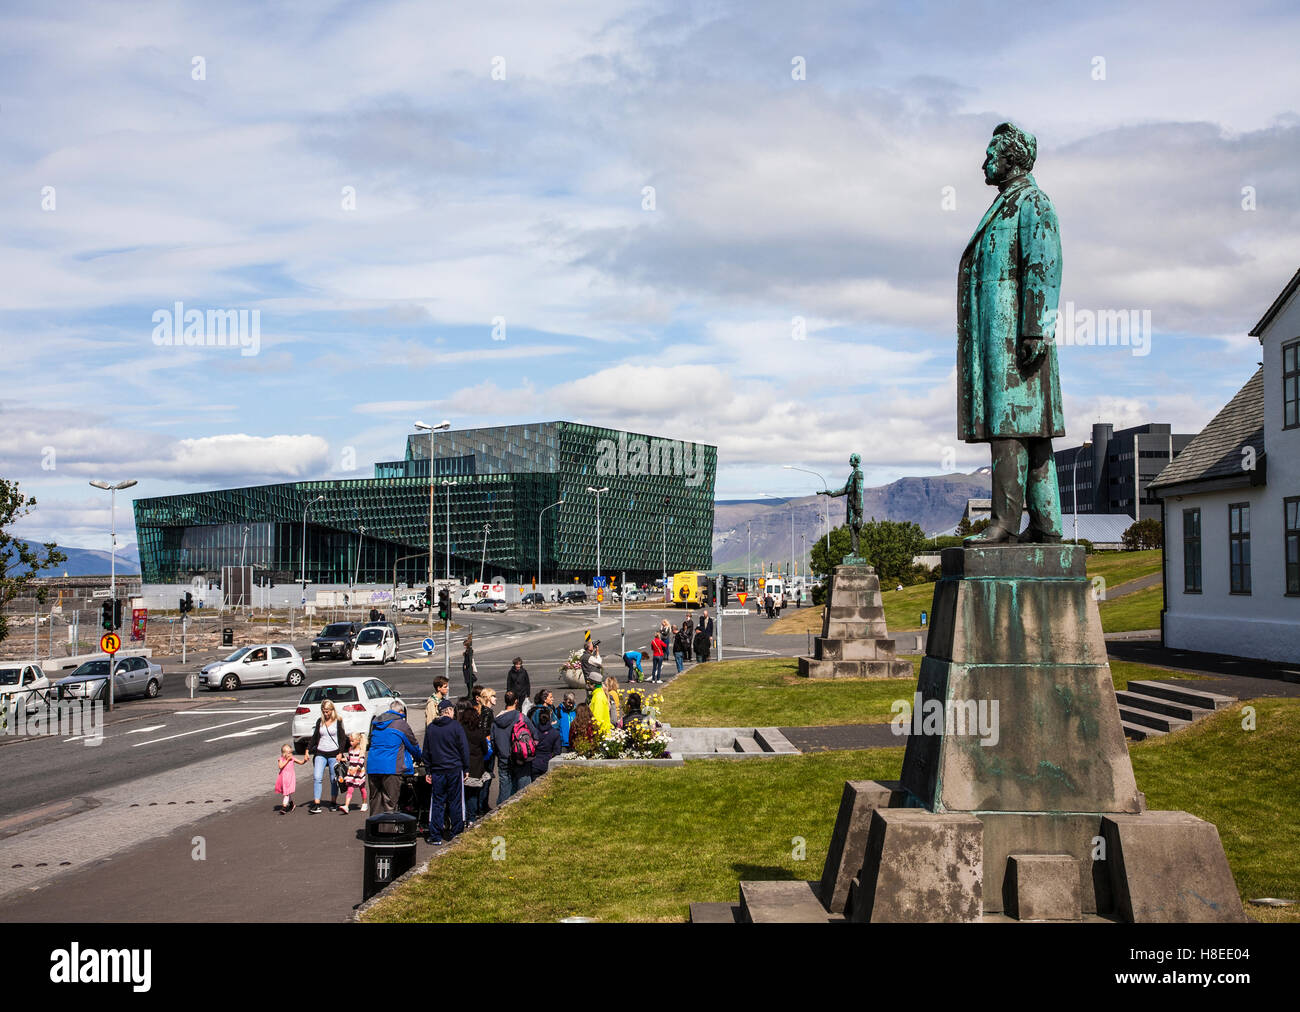 Hannes Hafstein Statue on right and Harpa Concert Hall in the background, Reykjavik, Iceland, Reykjavík, city summer Europe Stock Photo